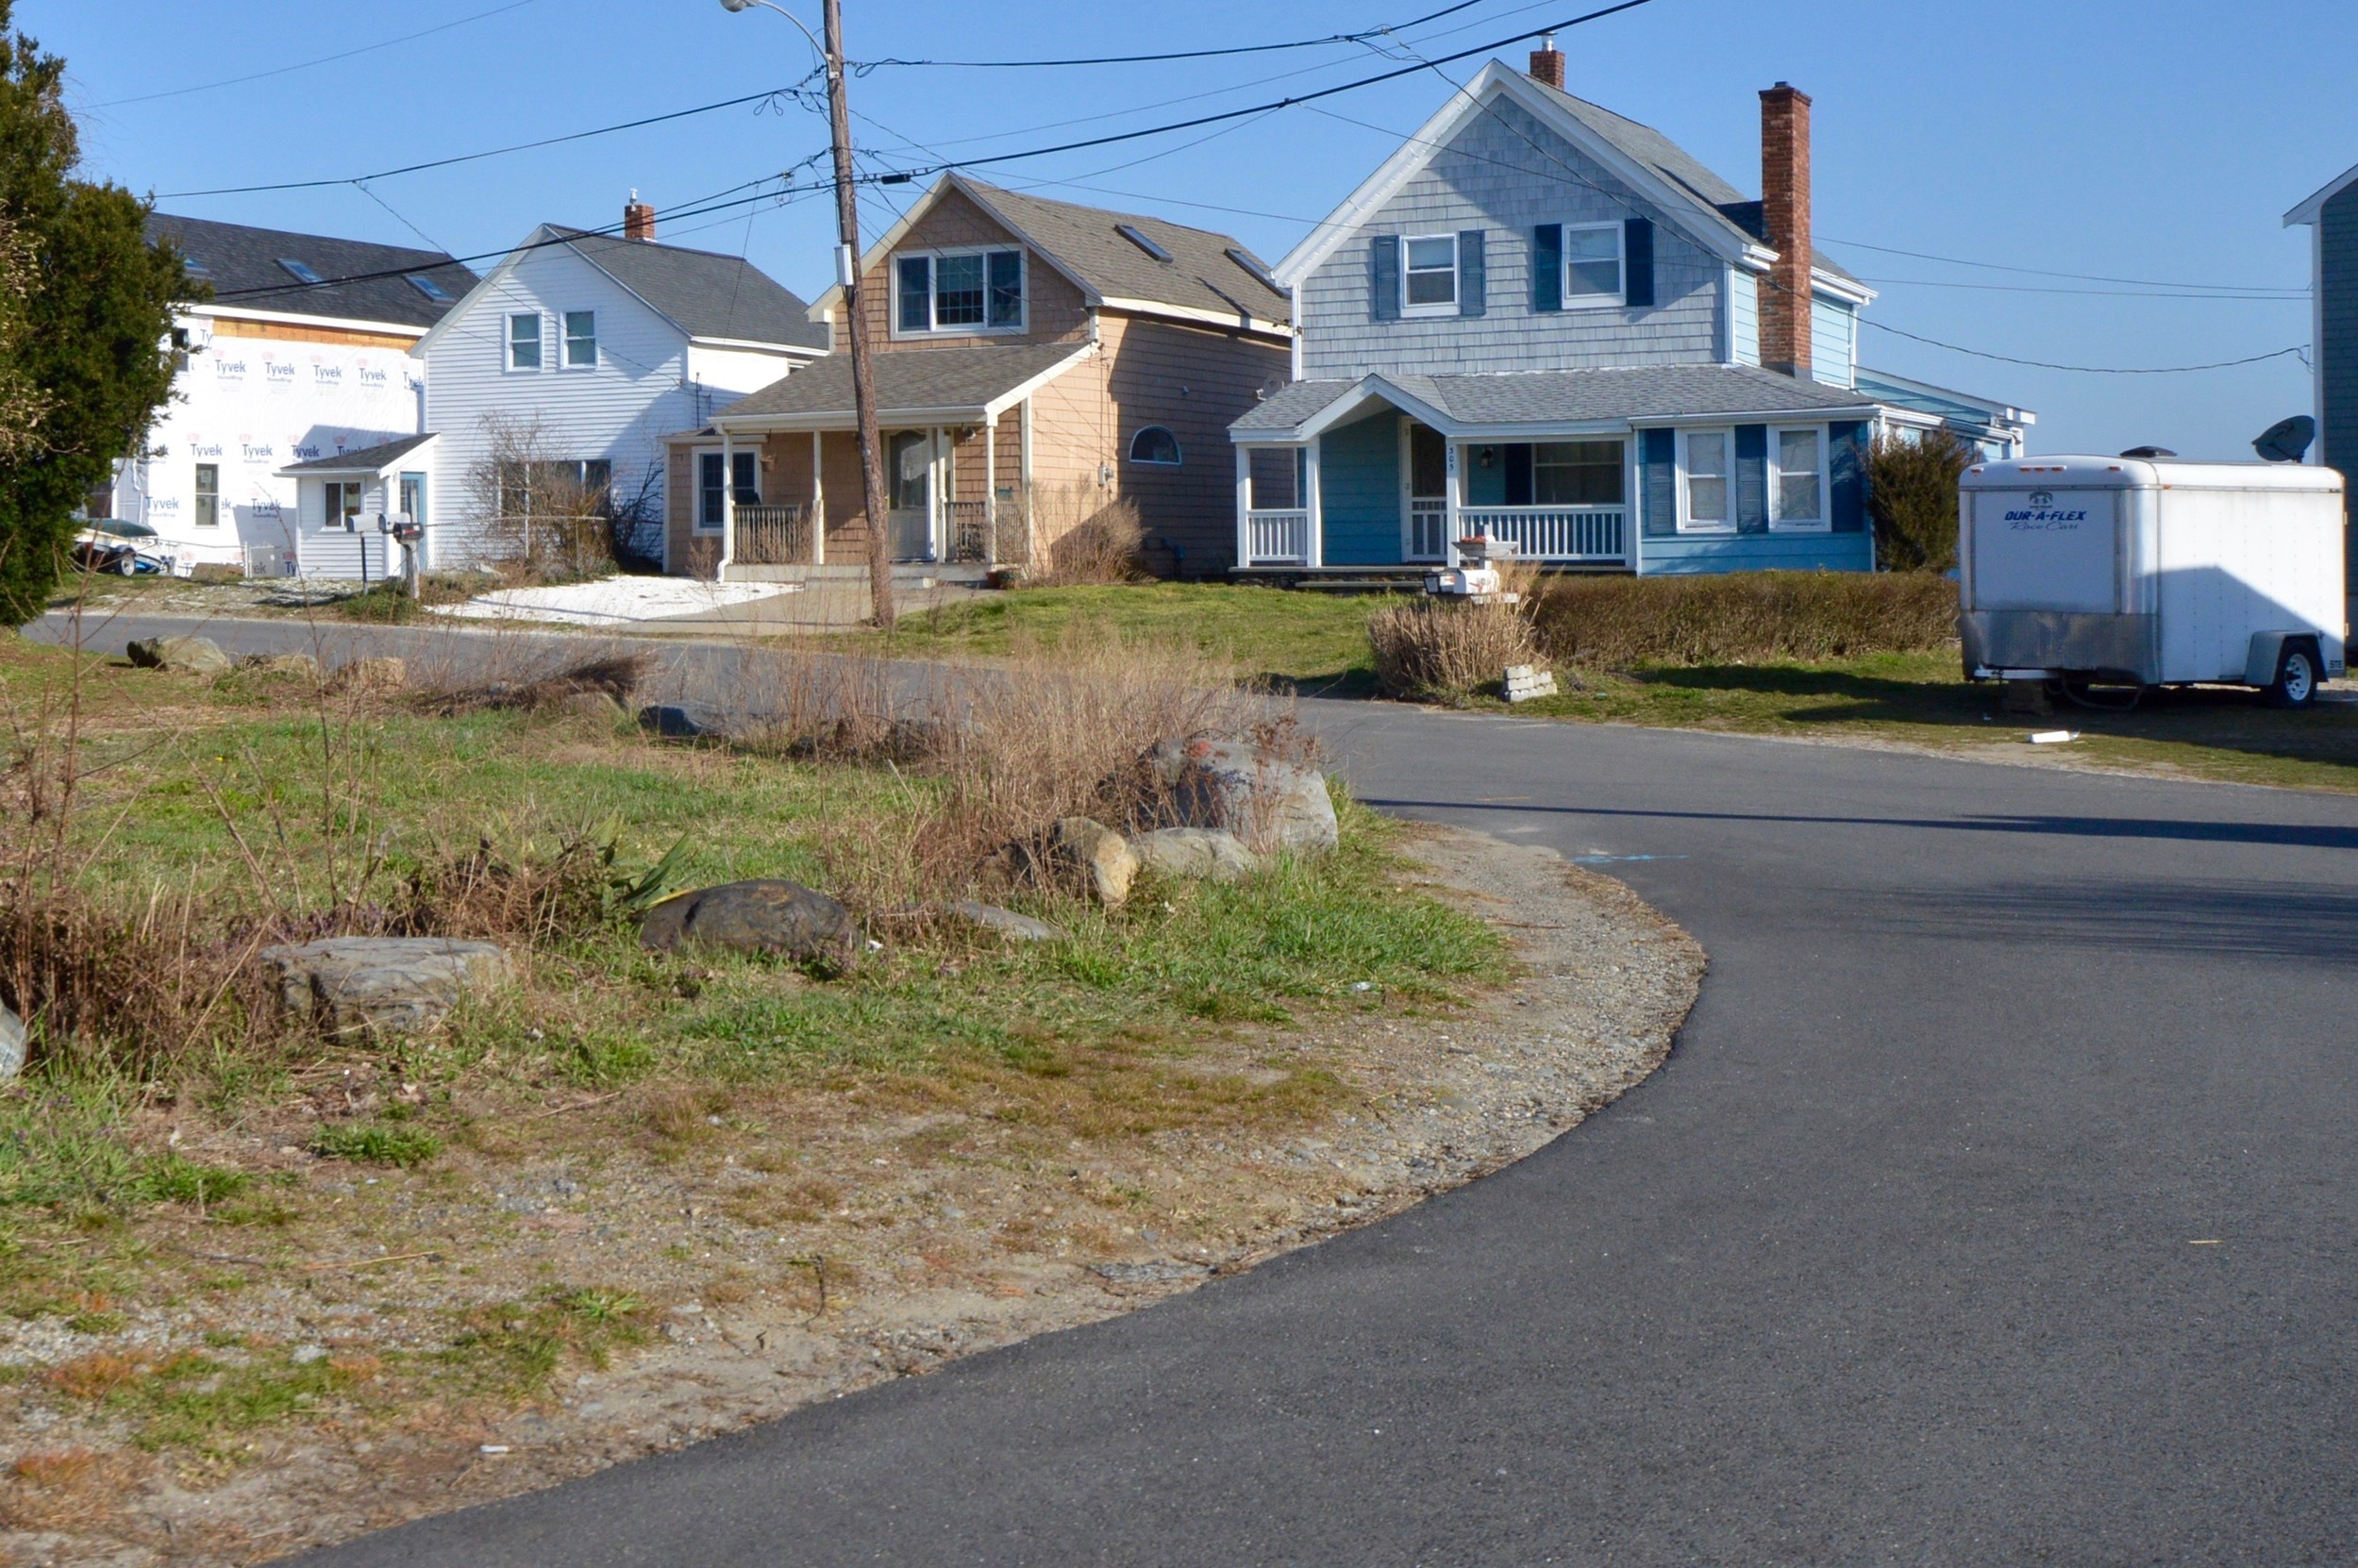 A section of Riverside Street overlooking Blue Bill Cove in Island Park has developed into “chaos” over the last few years due to short-term rentals, a resident complained to the Town Council Monday night.